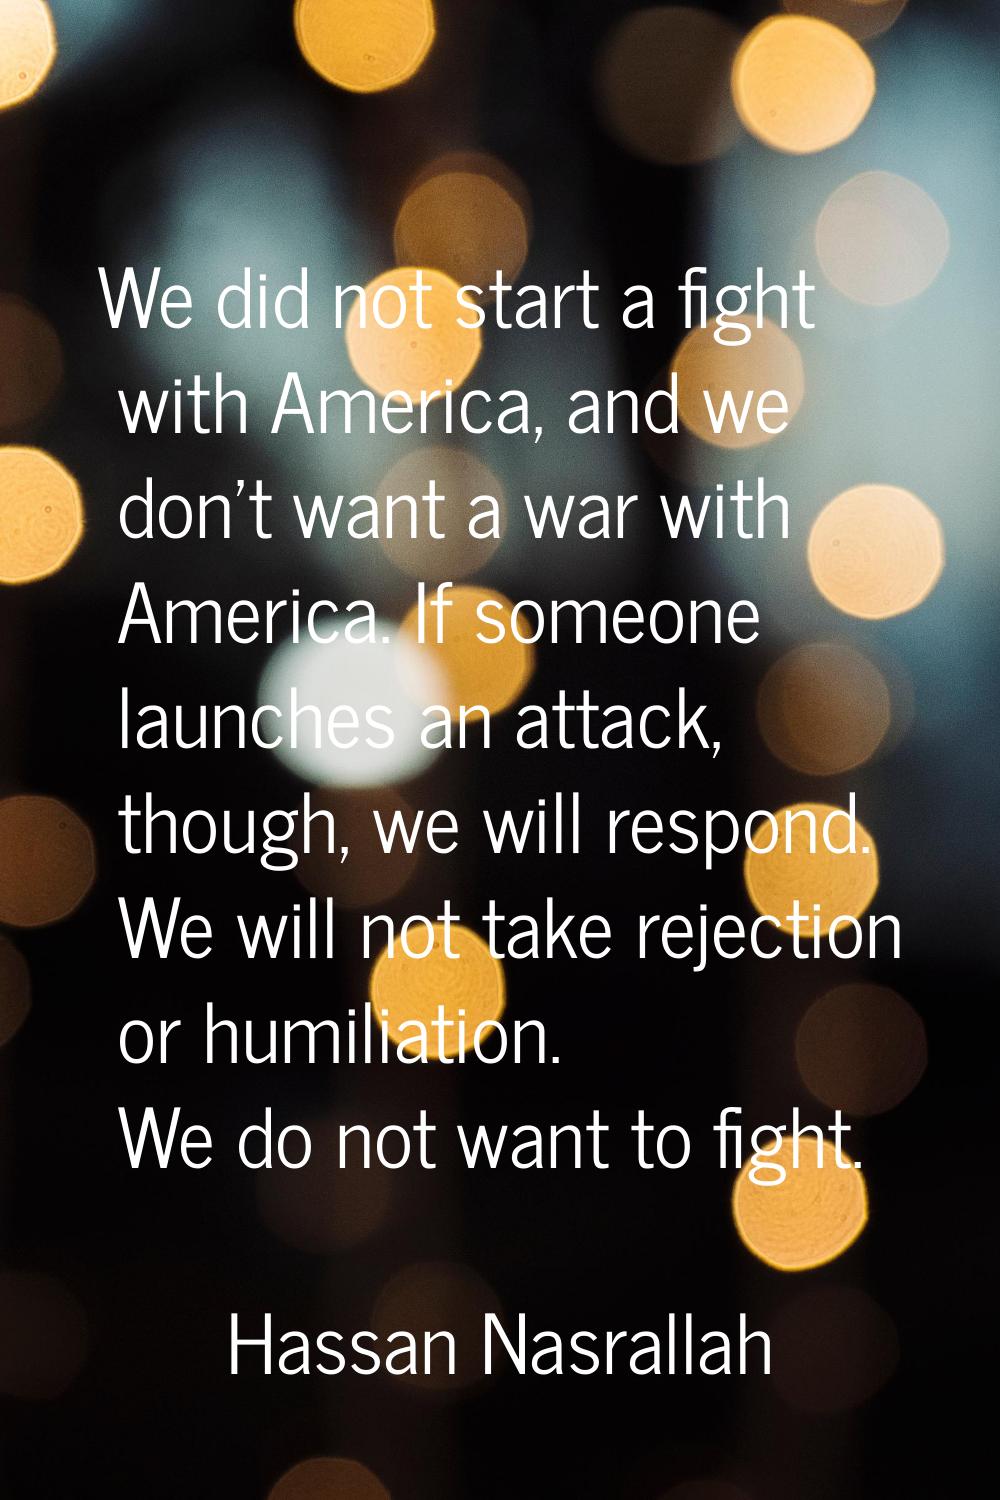 We did not start a fight with America, and we don't want a war with America. If someone launches an